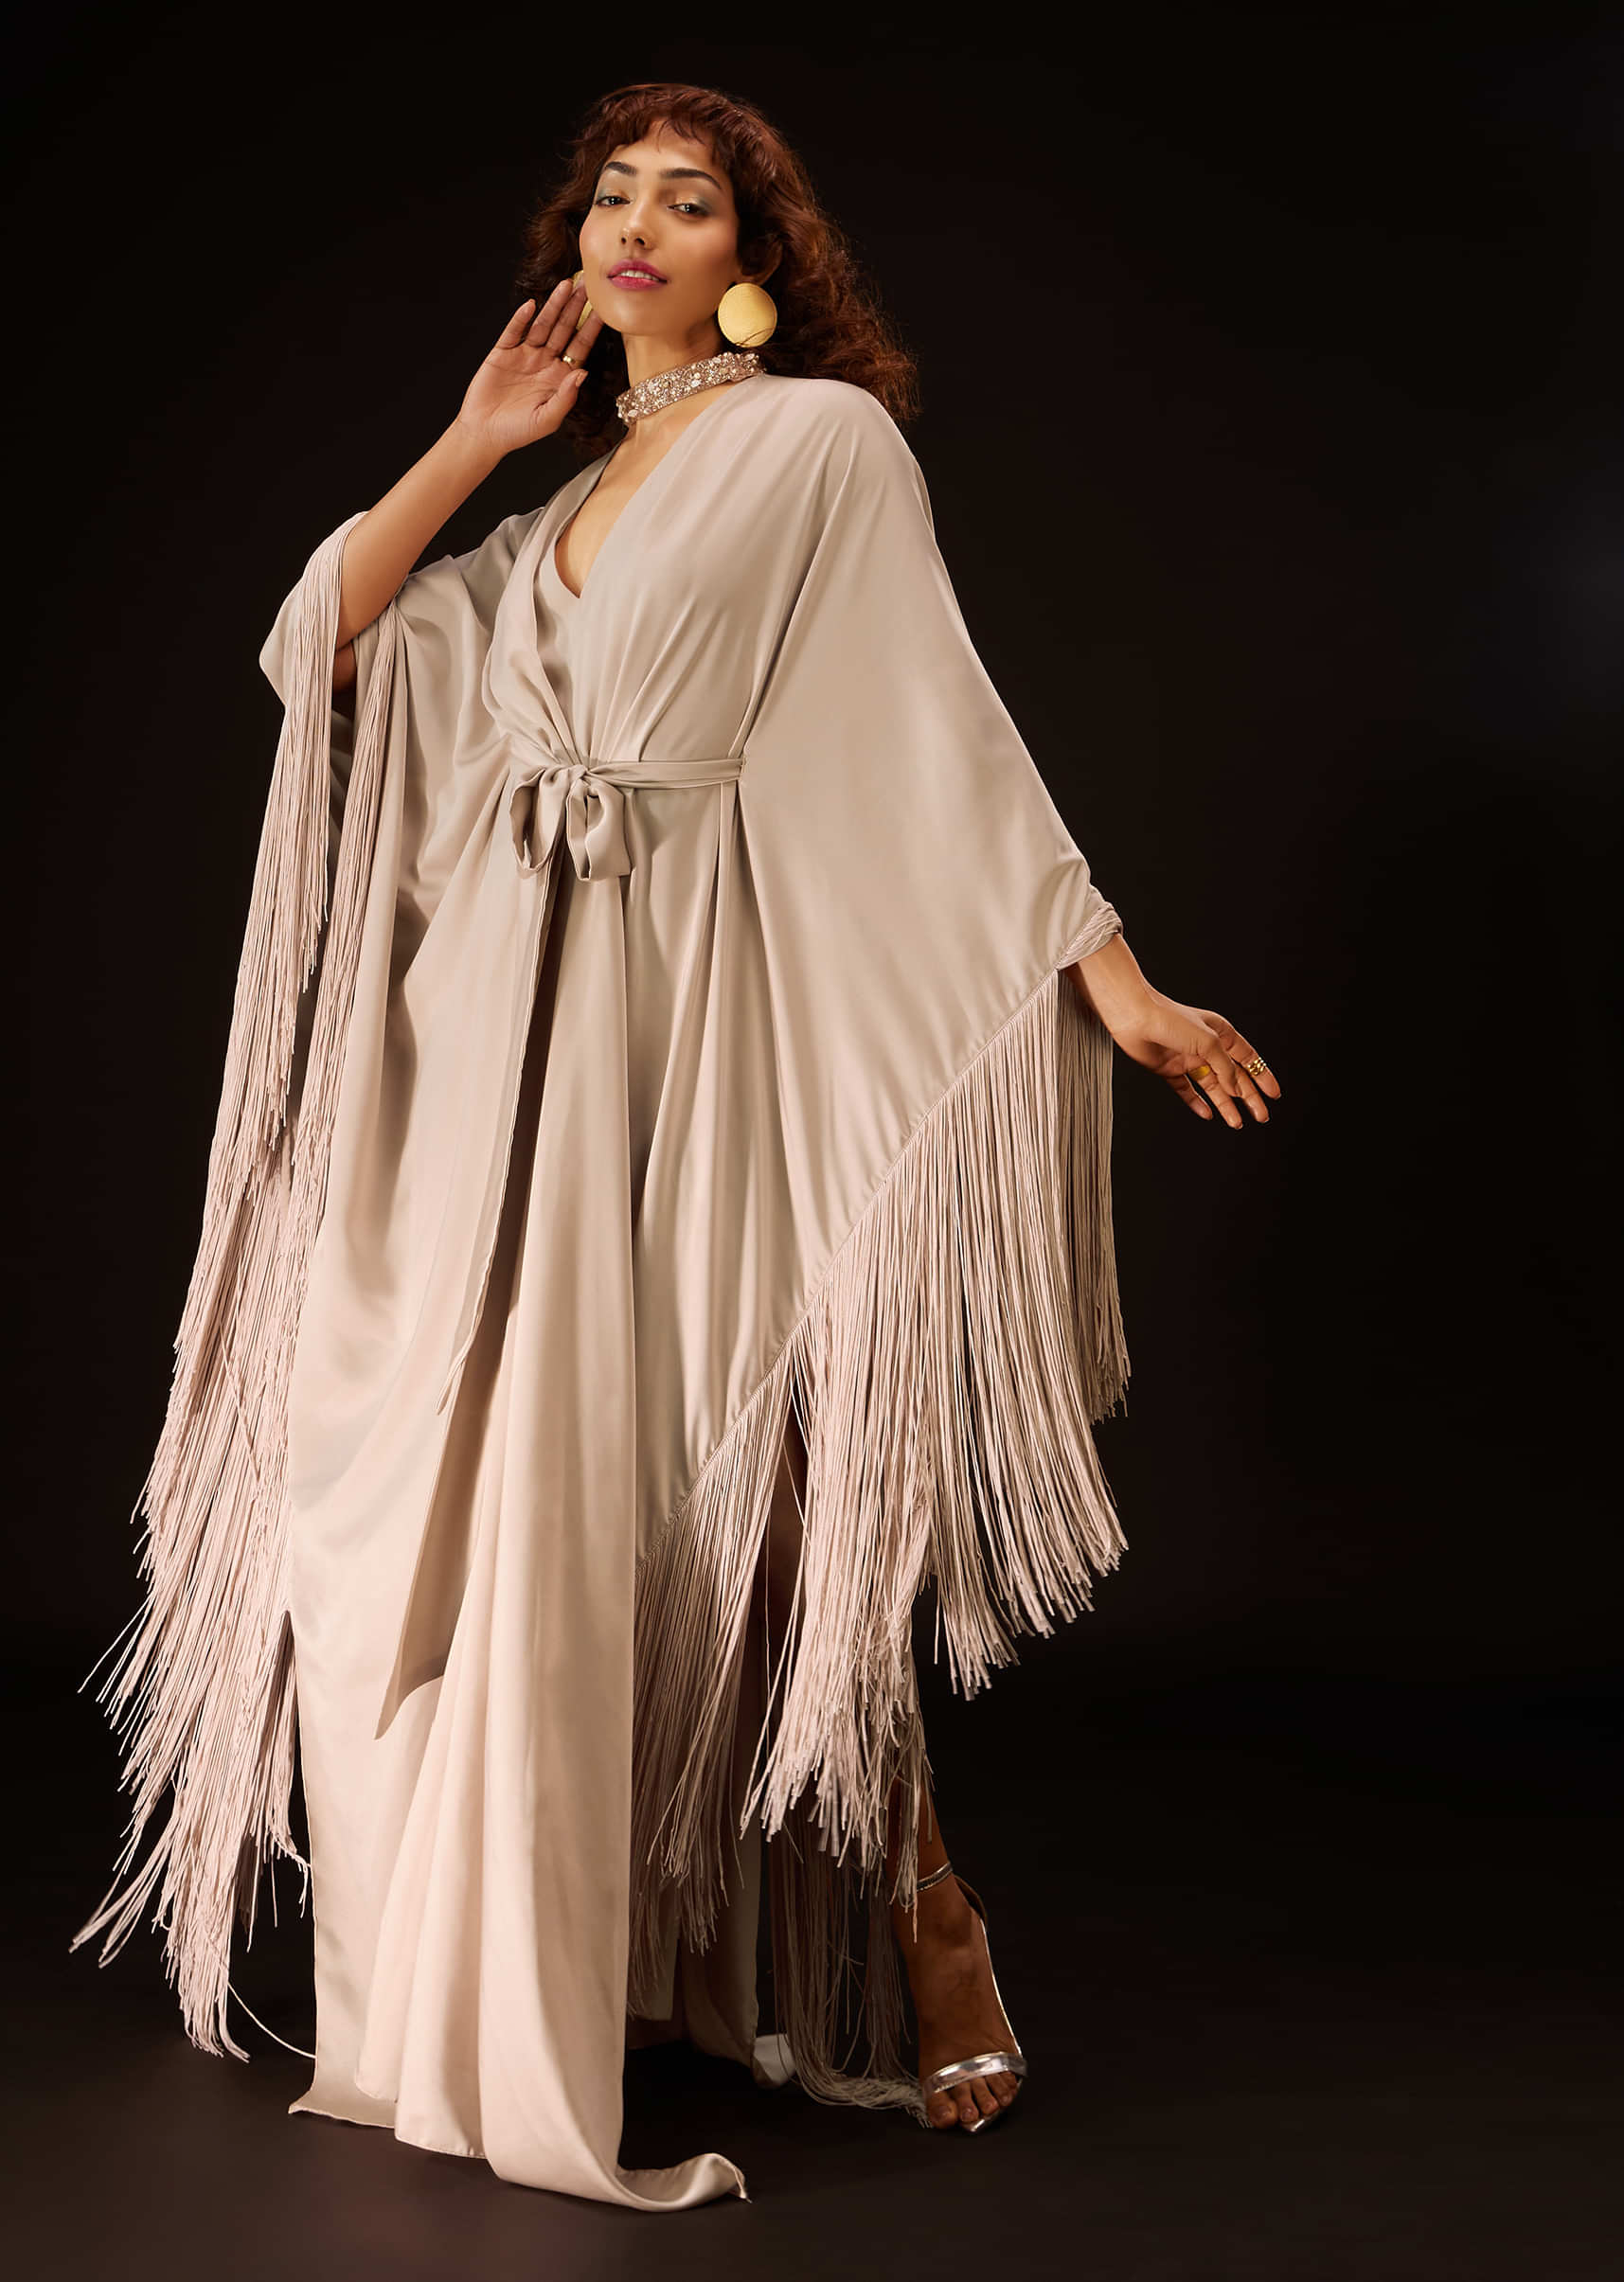 Candy Pink Embroidered Kaftan With Fringe Border And Tie-Up Bow - DEME X KALKI